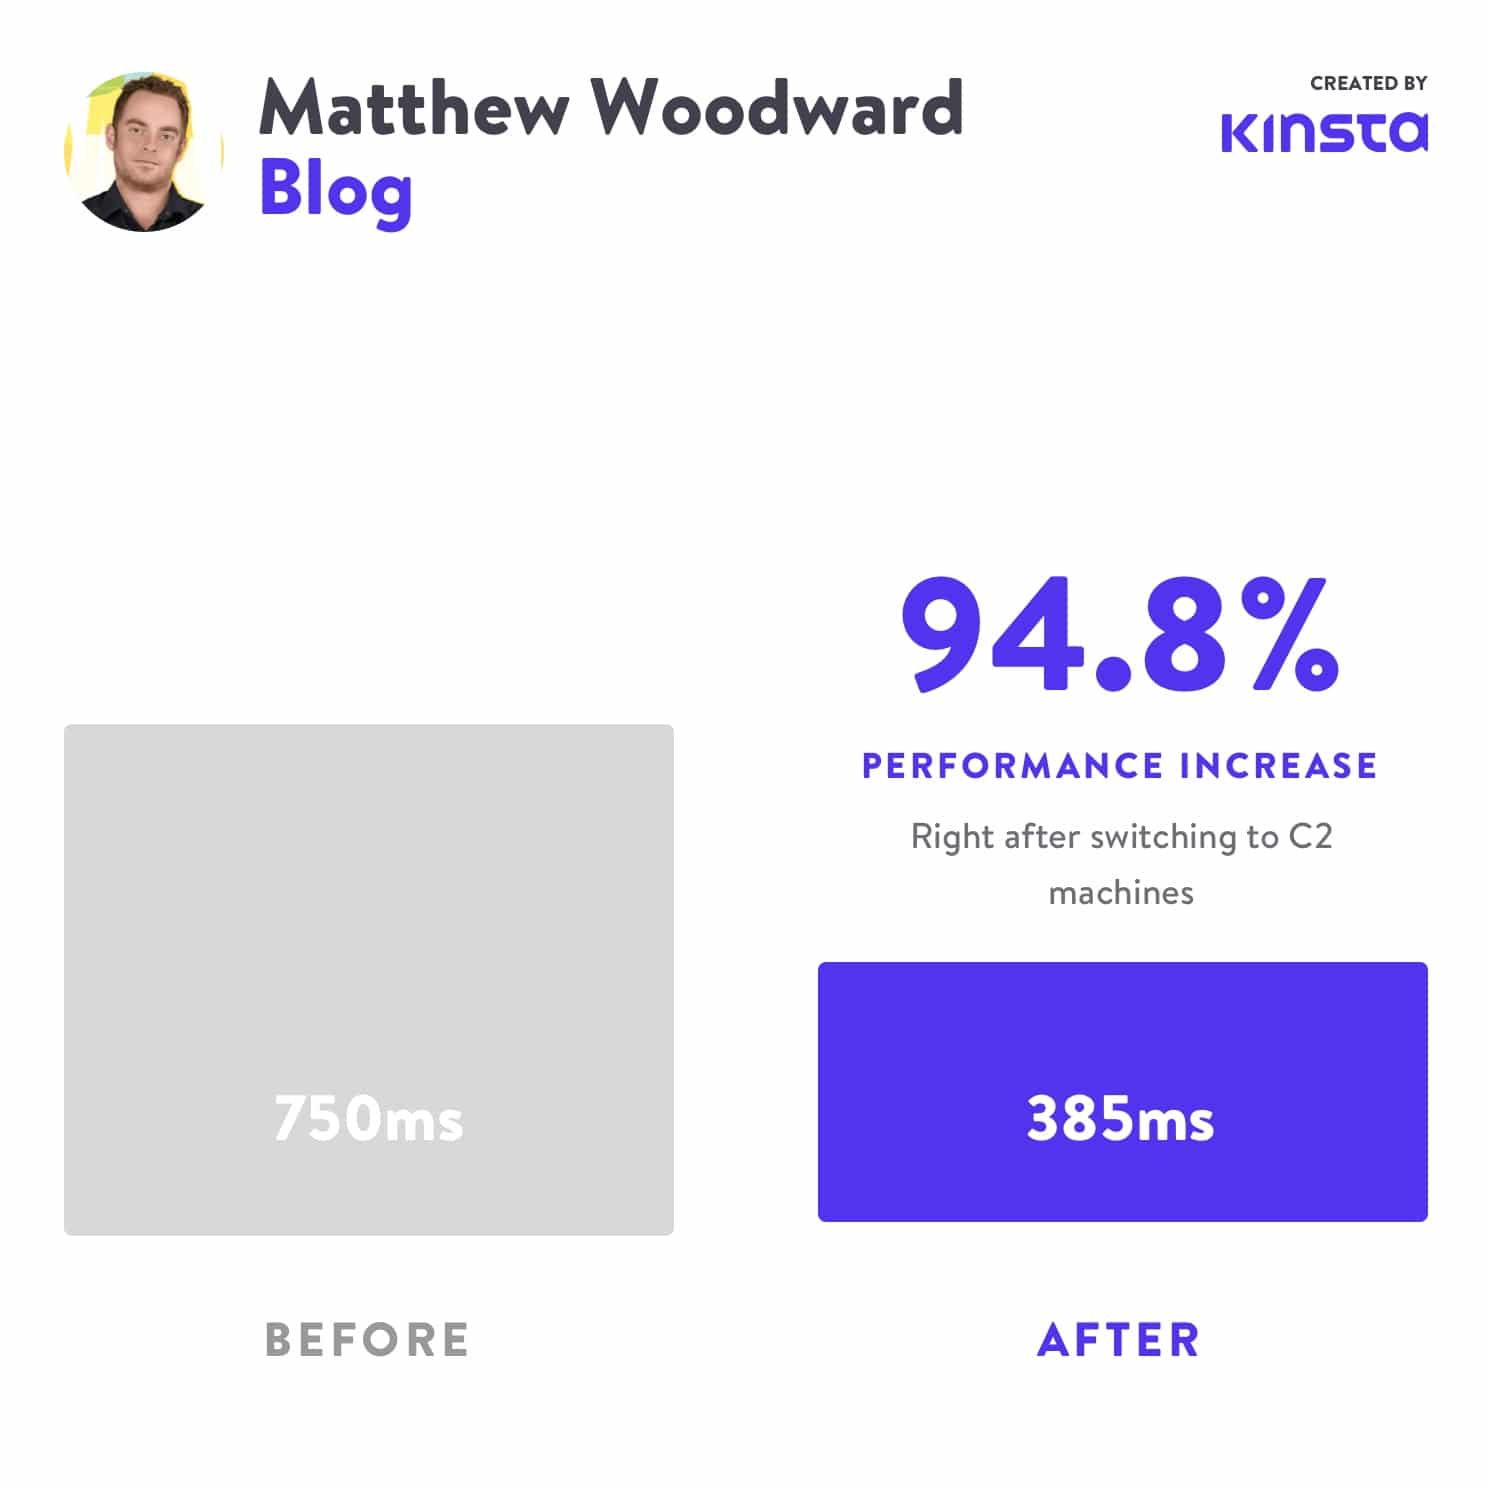 Matthew Woodward saw a 94.8% performance increase after moving to C2.